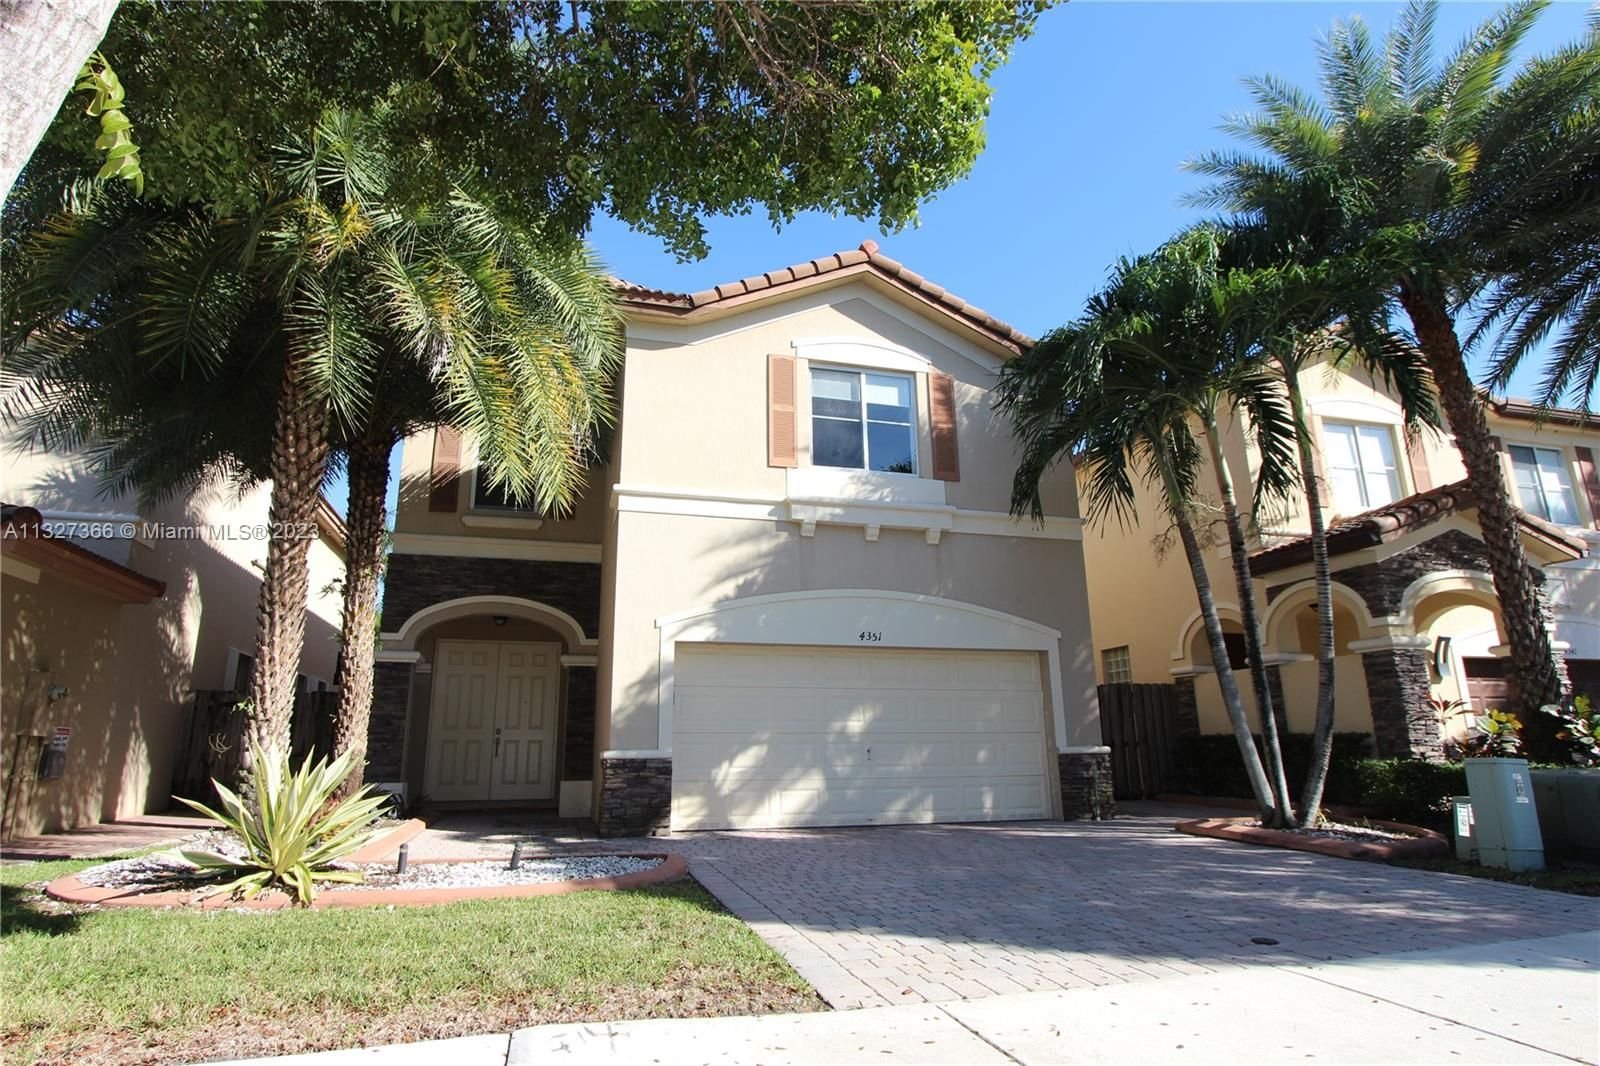 Real estate property located at 4351 112th Ct, Miami-Dade County, Doral, FL